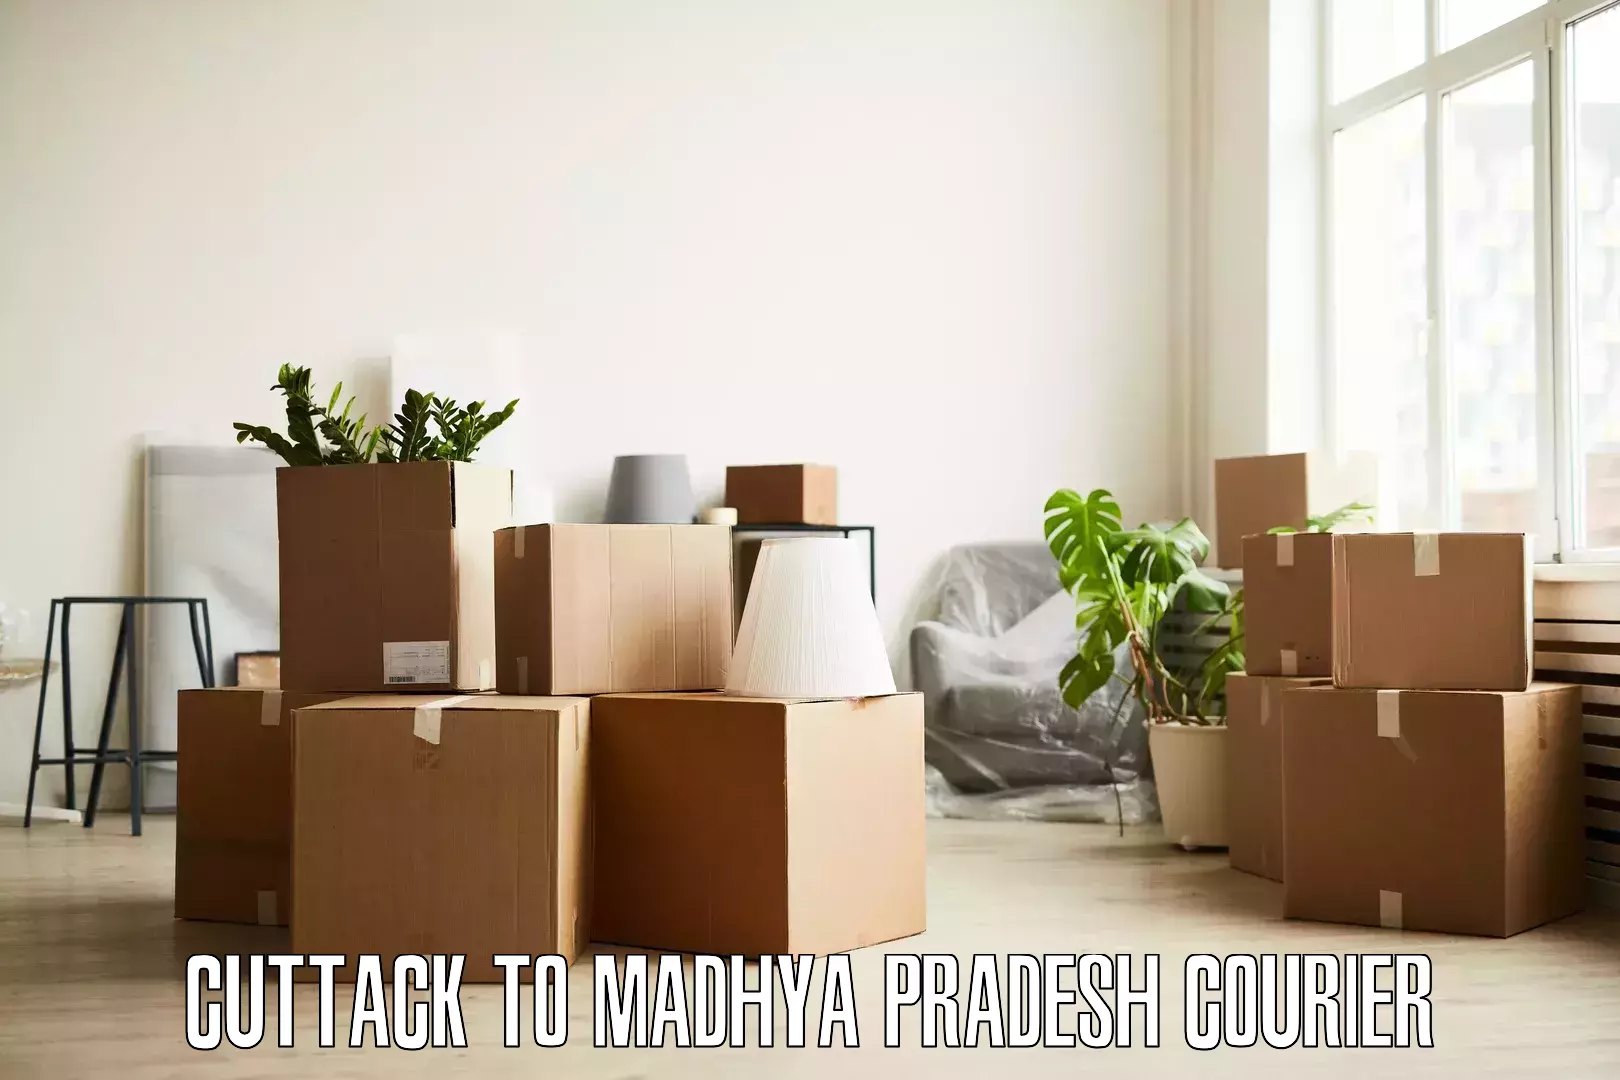 Professional packing and transport Cuttack to Udaipura